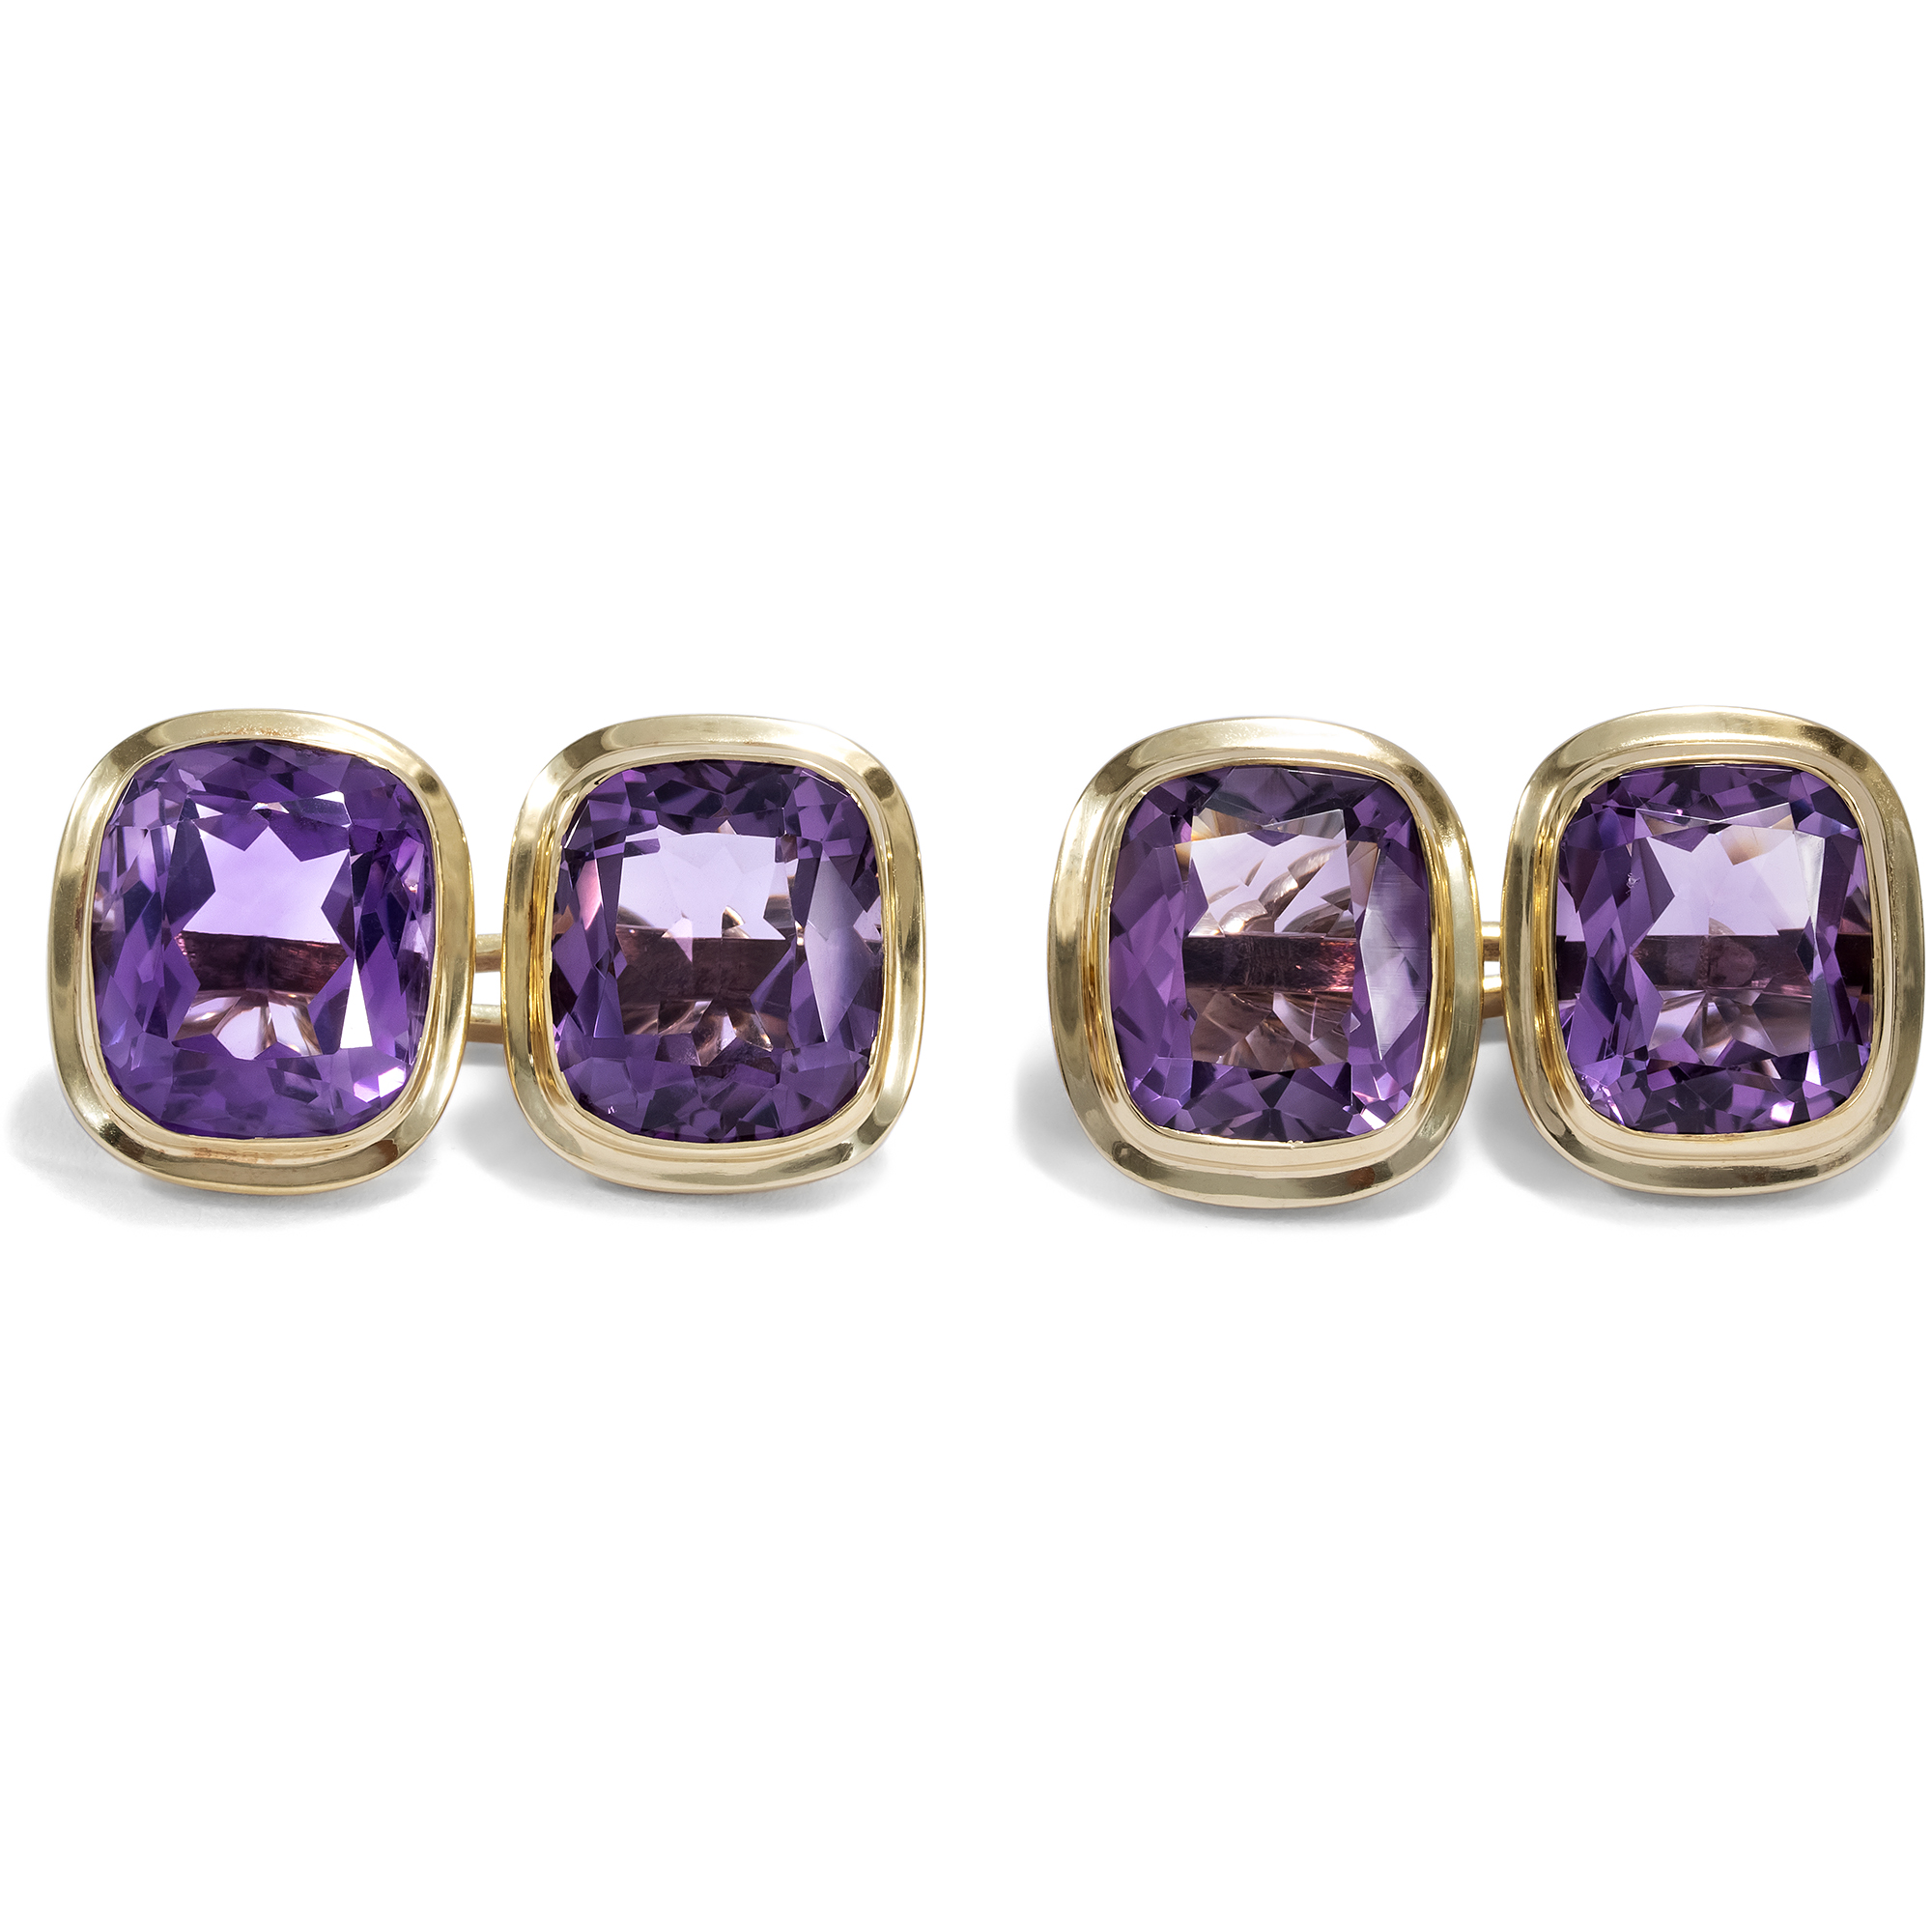 Vintage Gold Cufflinks with Amethysts, Germany c. 1960